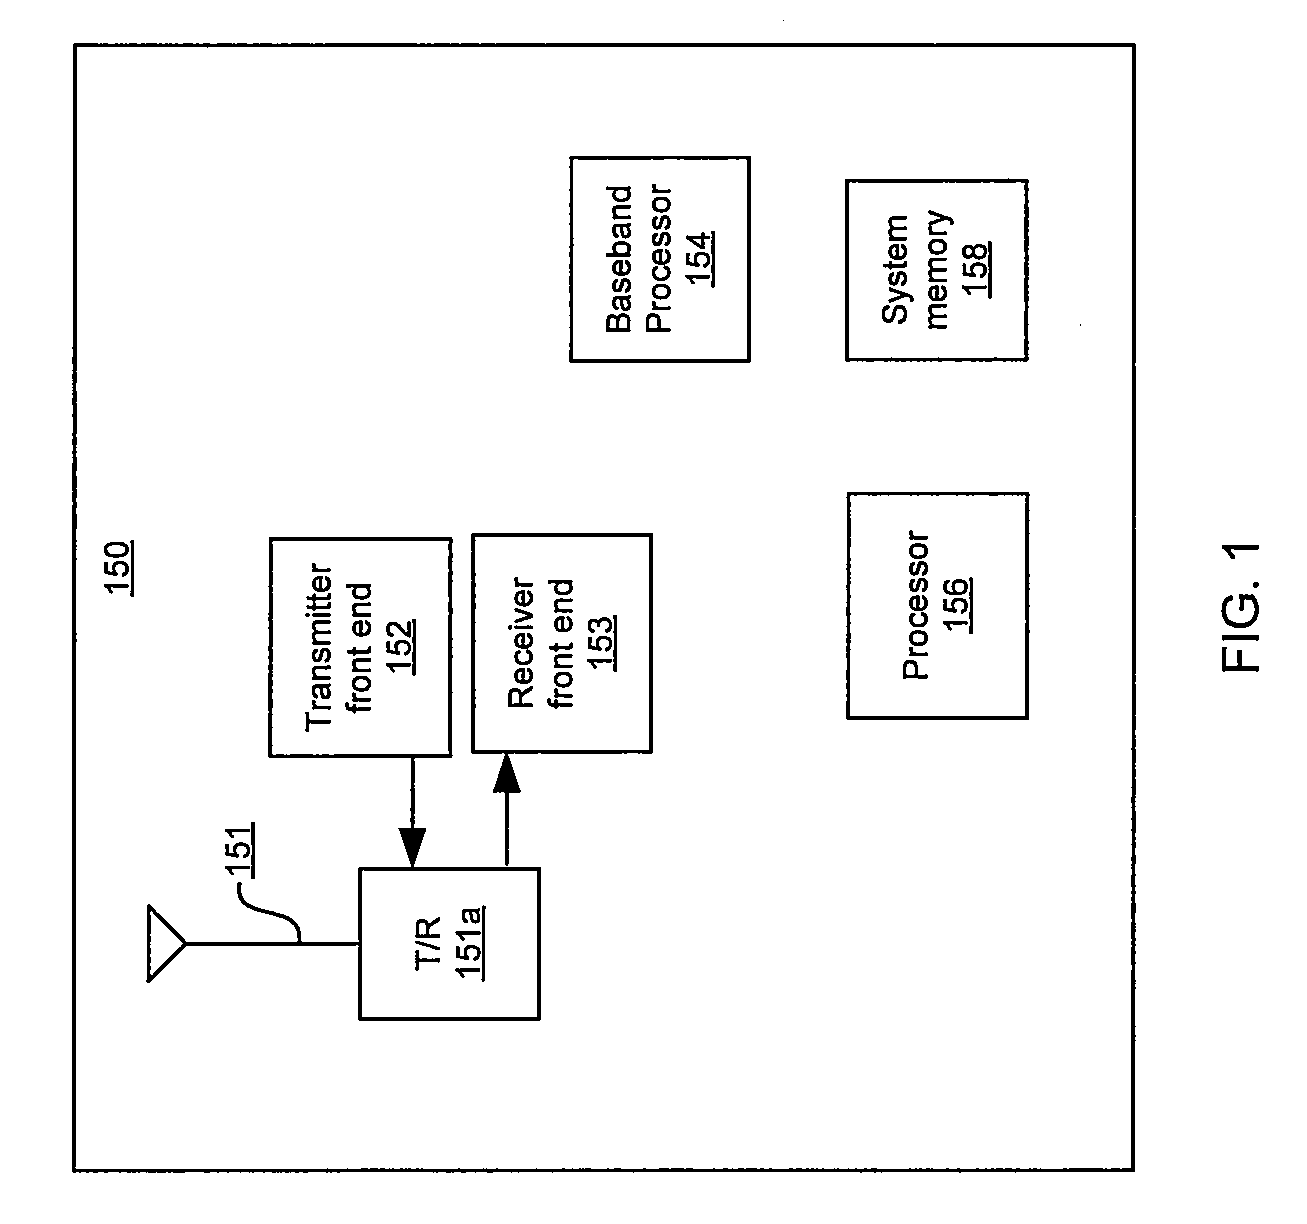 Method And System For Quadrature Local Oscillator Generator Utilizing A DDFS For Extremely High Frequencies